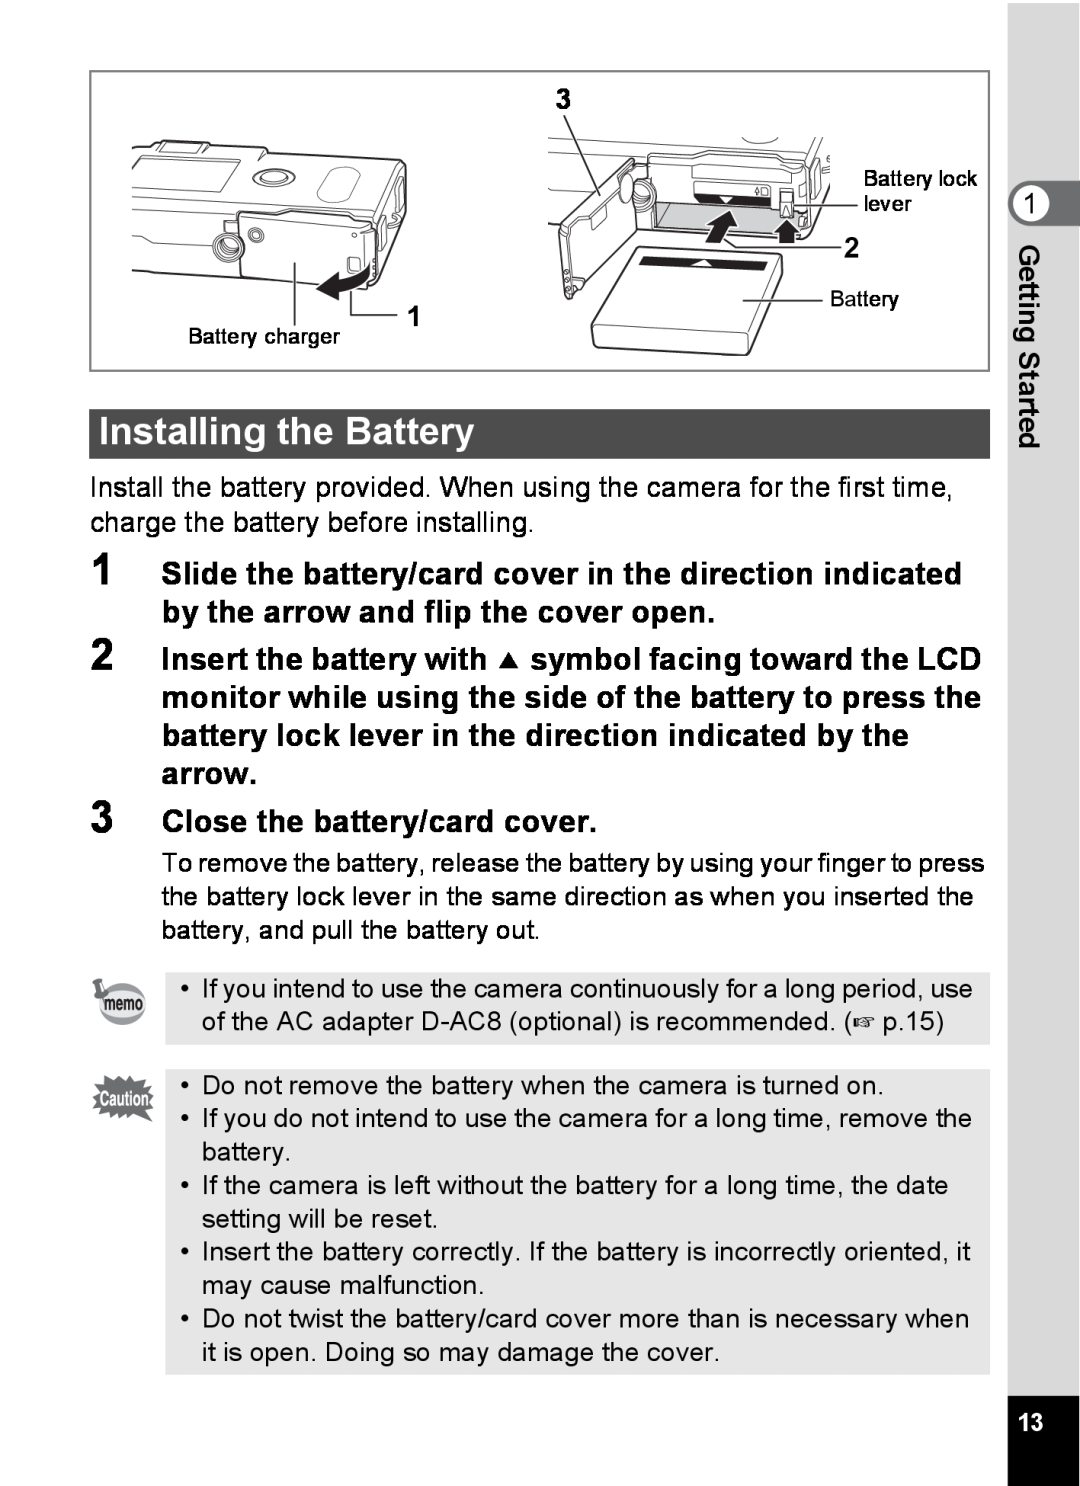 Pentax S4 manual Installing the Battery, Close the battery/card cover 